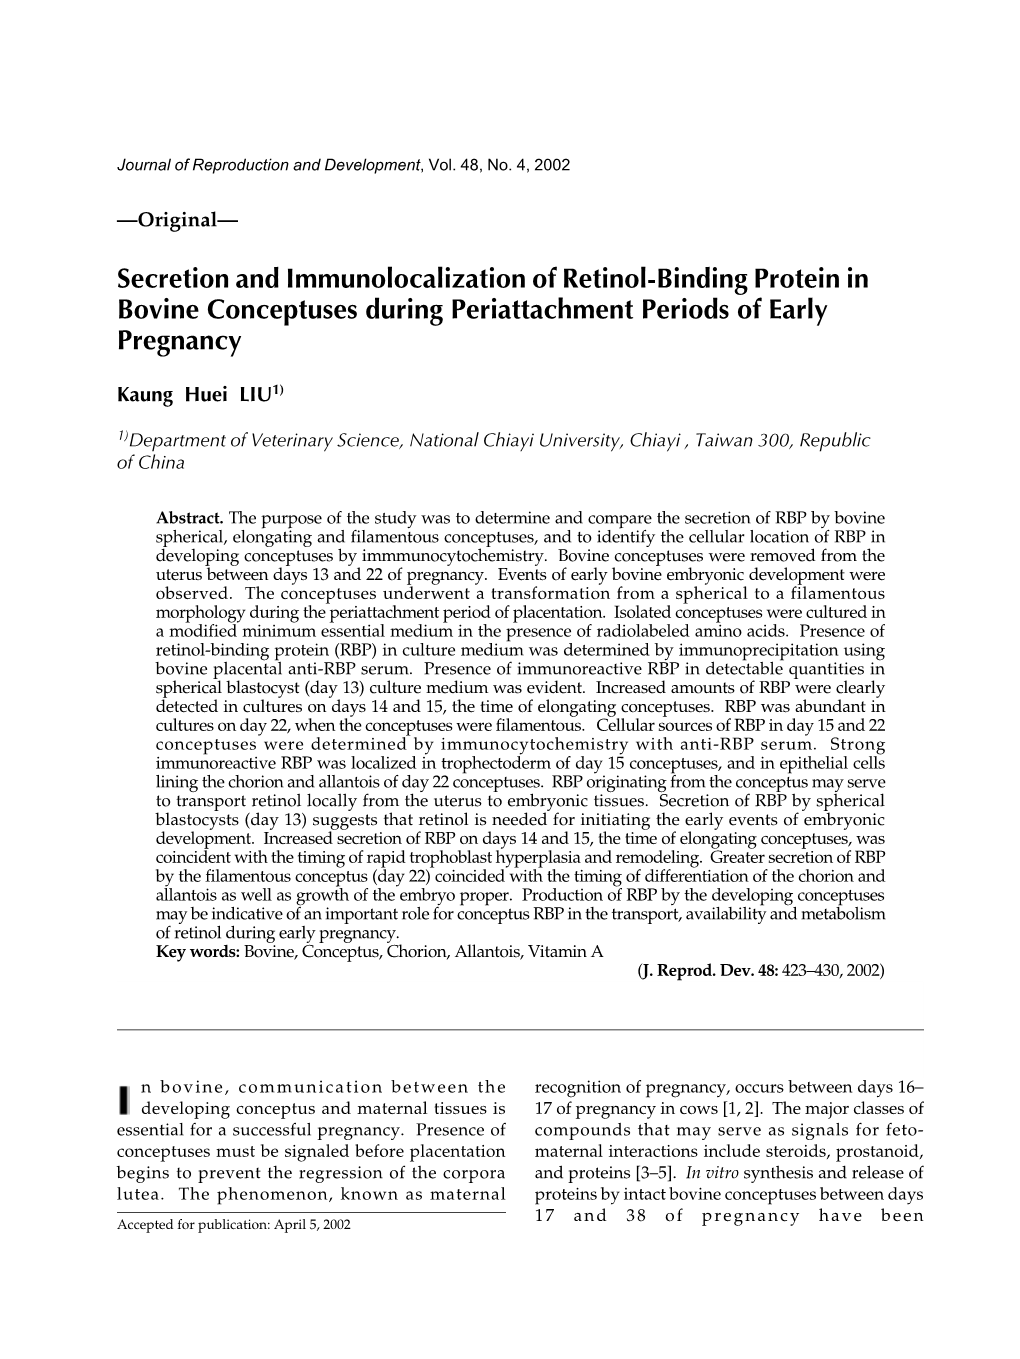 Secretion and Immunolocalization of Retinol-Binding Protein in Bovine Conceptuses During Periattachment Periods of Early Pregnancy